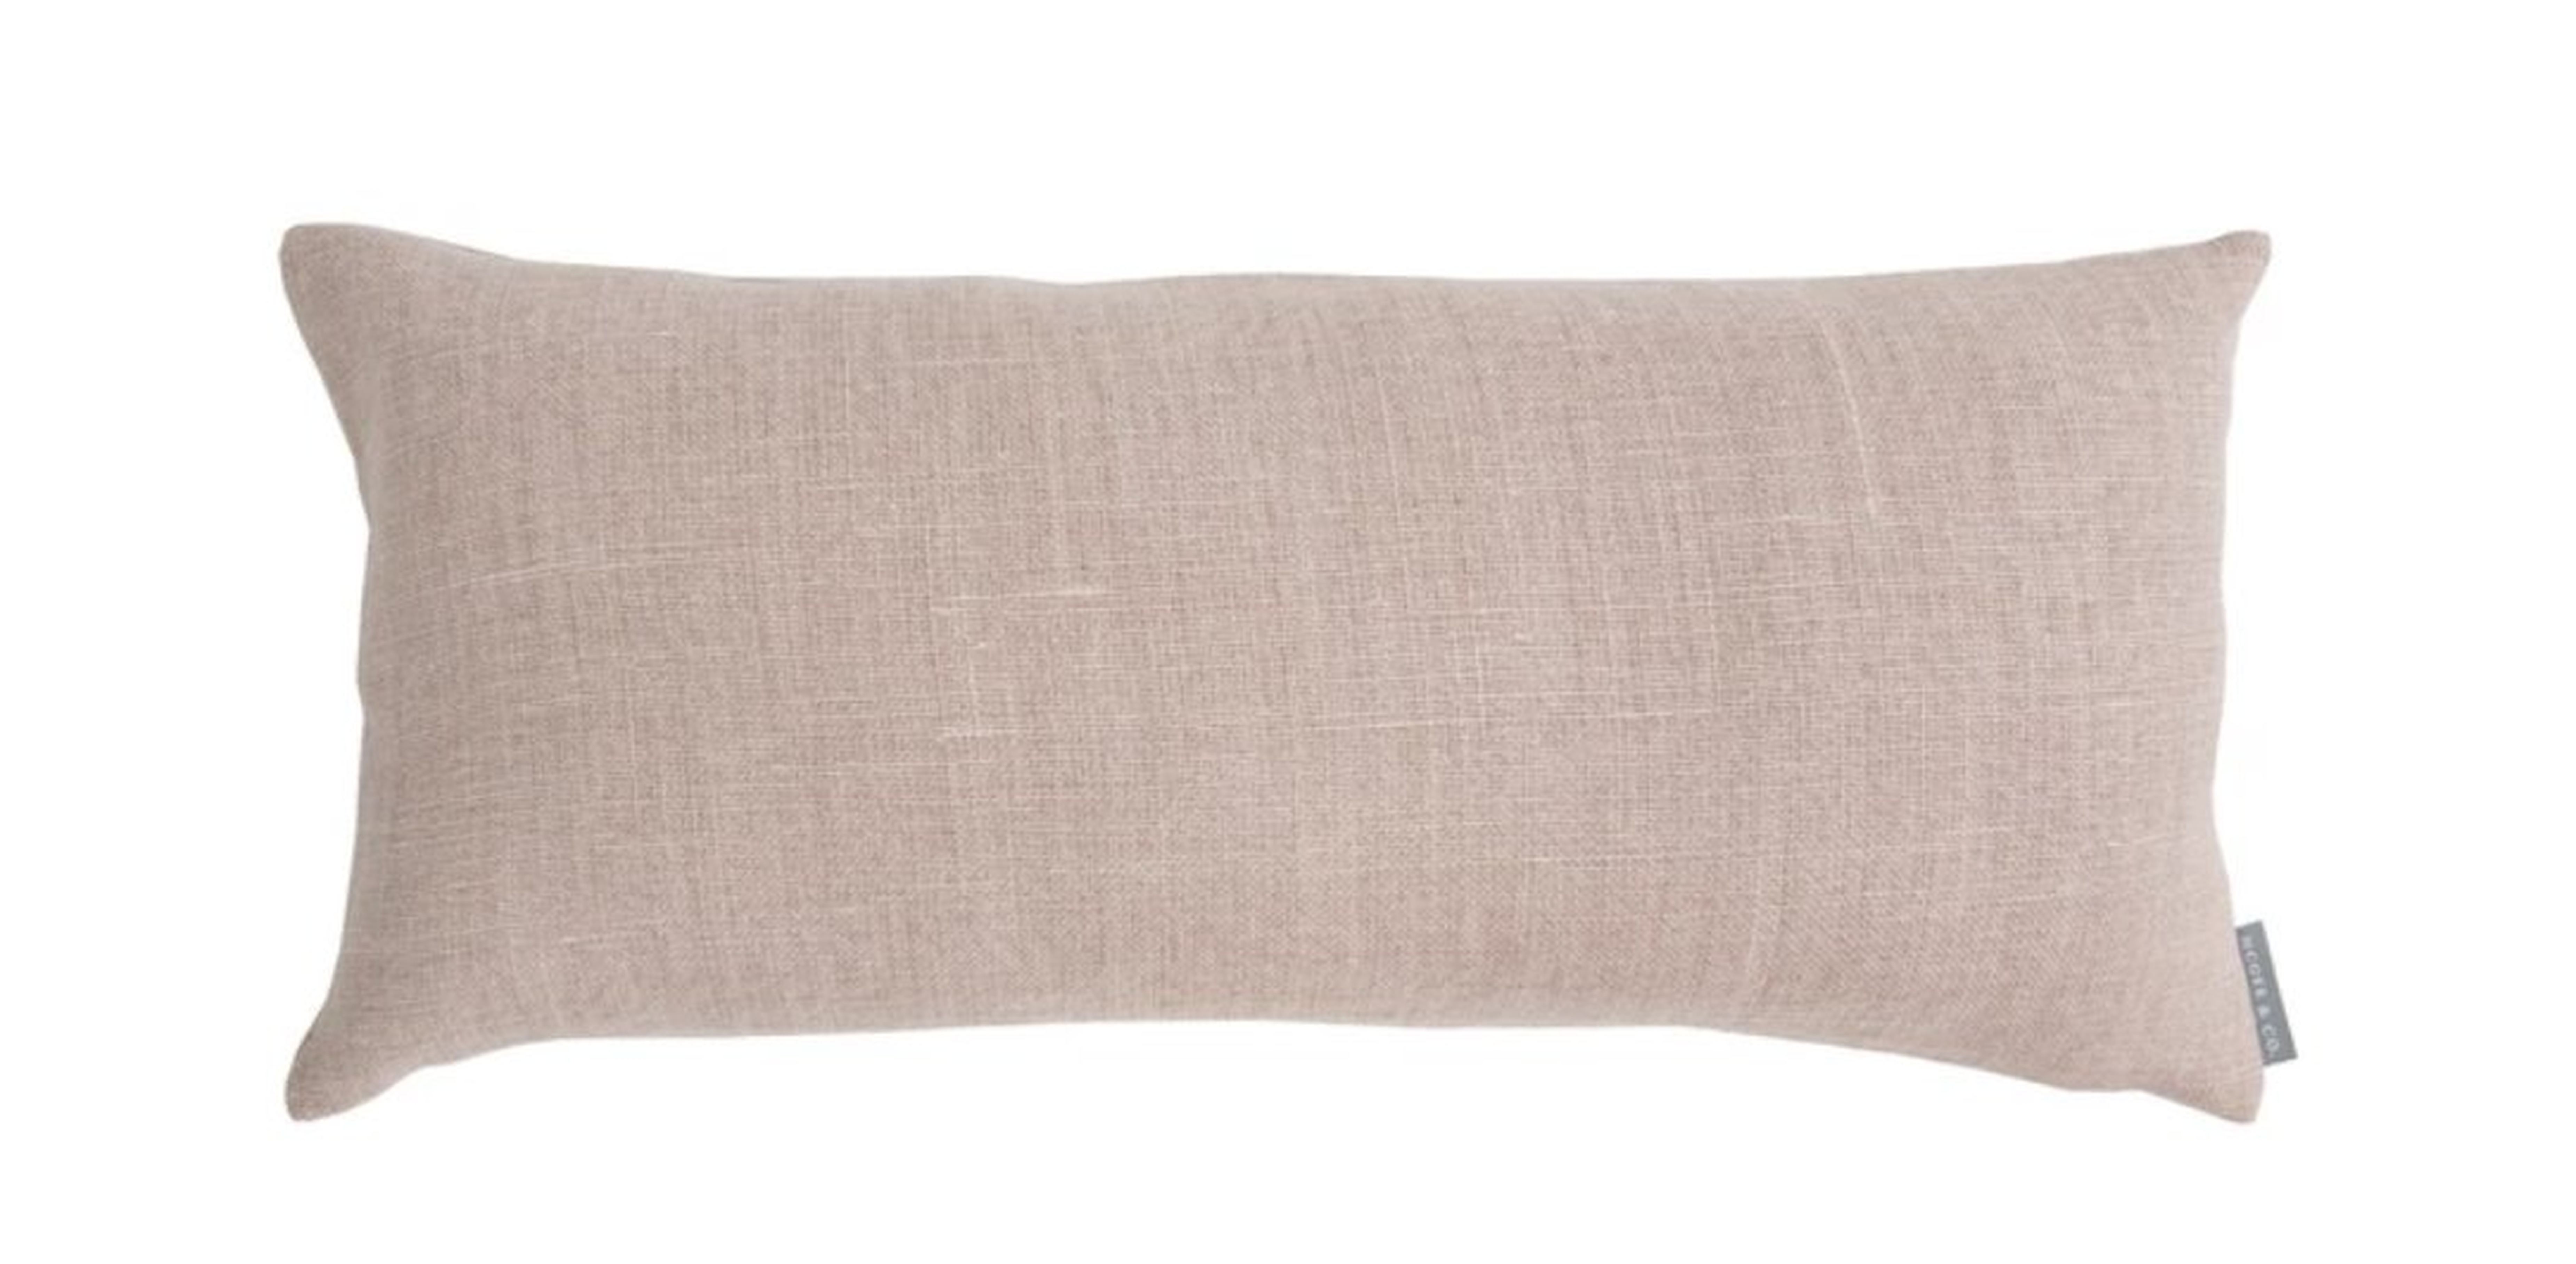 ROSIE PILLOW COVER - McGee & Co.